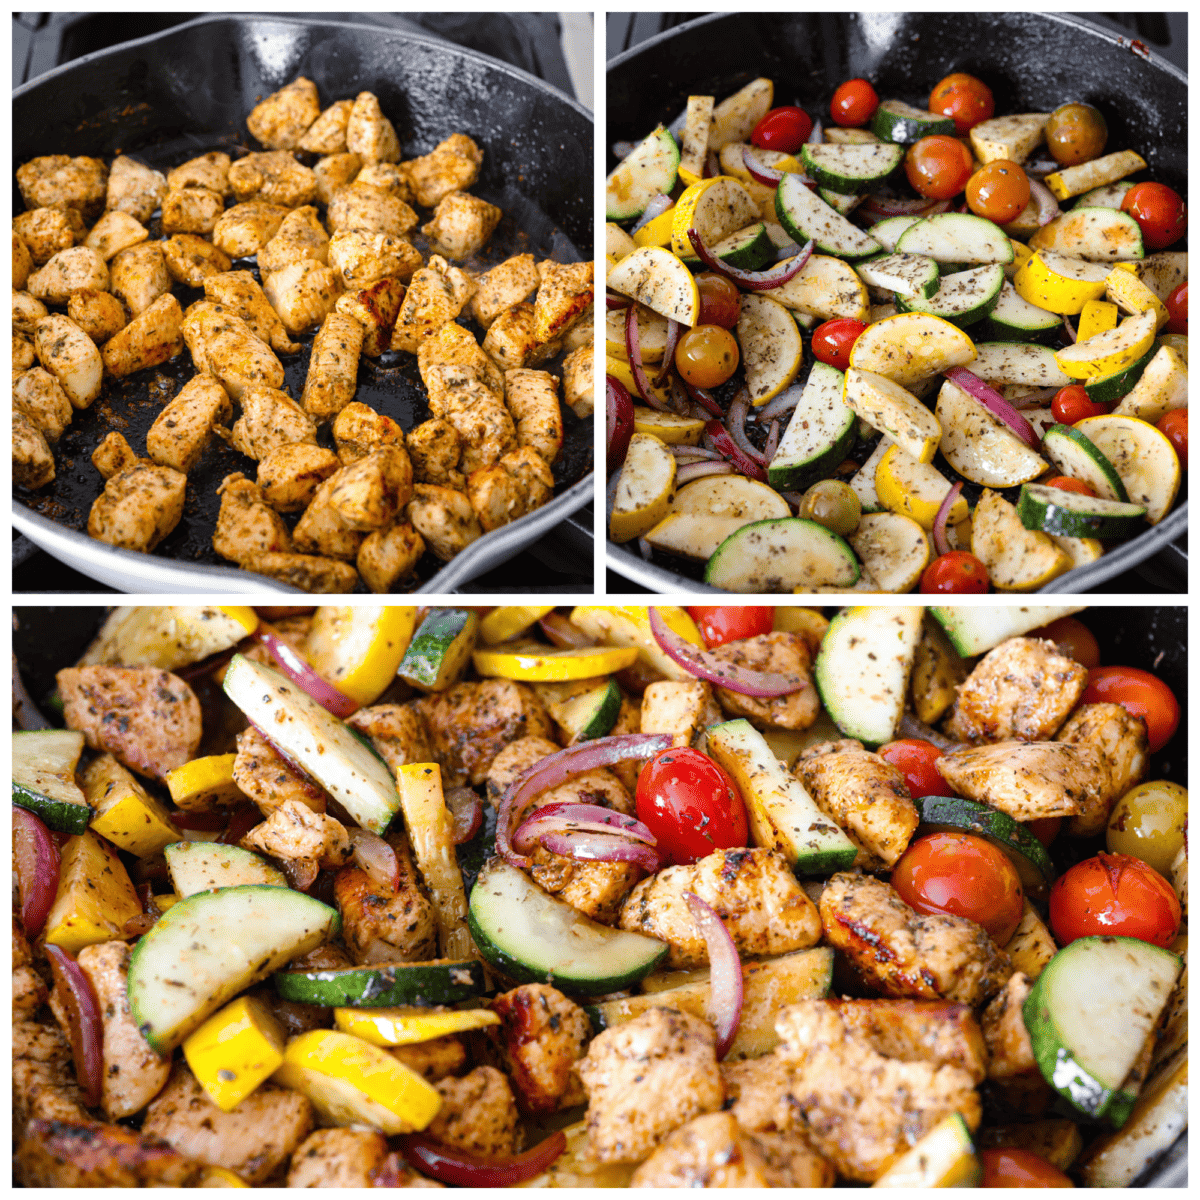 First photo of the chicken cooking in a skillet. Second photo of the vegetables cooking in a skillet. Third photo of cooked chicken and vegetables combined together in a skillet.